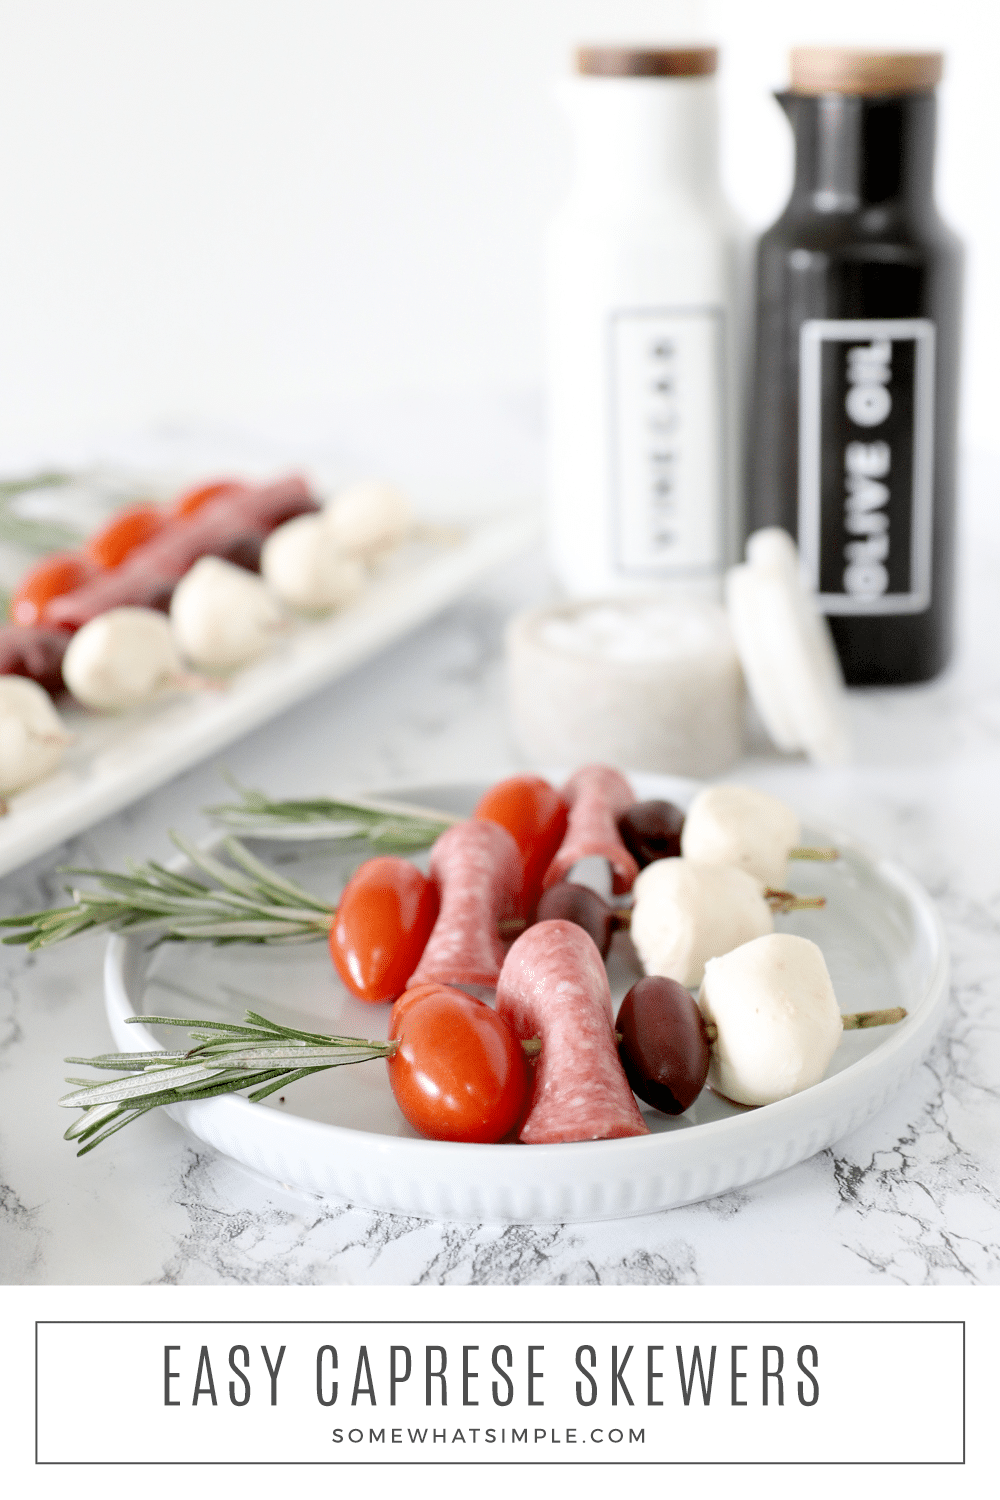 Rosemary Caprese Skewers are simple to put together and taste delicious! They're impressive appetizers that look fancy without the fuss! via @somewhatsimple